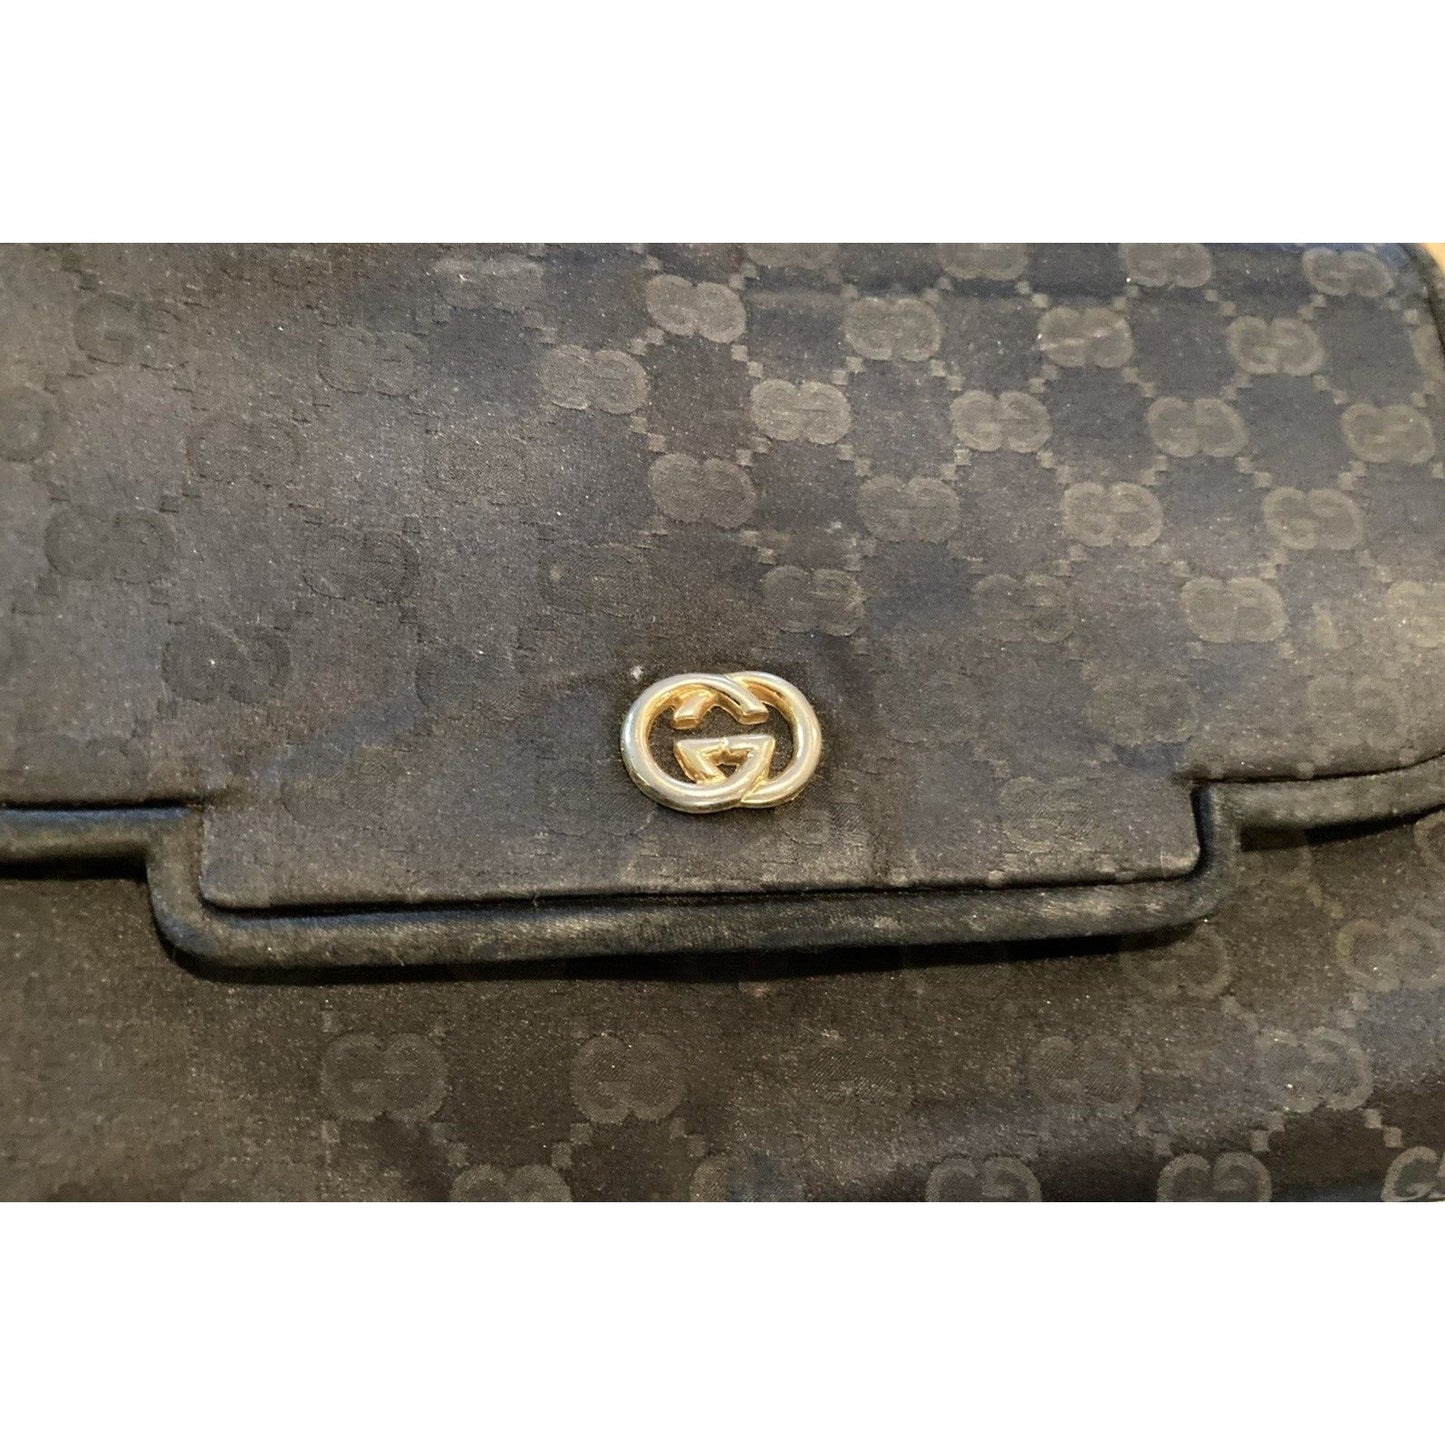 Vintage, one of a kind, Gucci, black Guccissima print silk over leather, two-way style bag with a gold chain link, removable strap